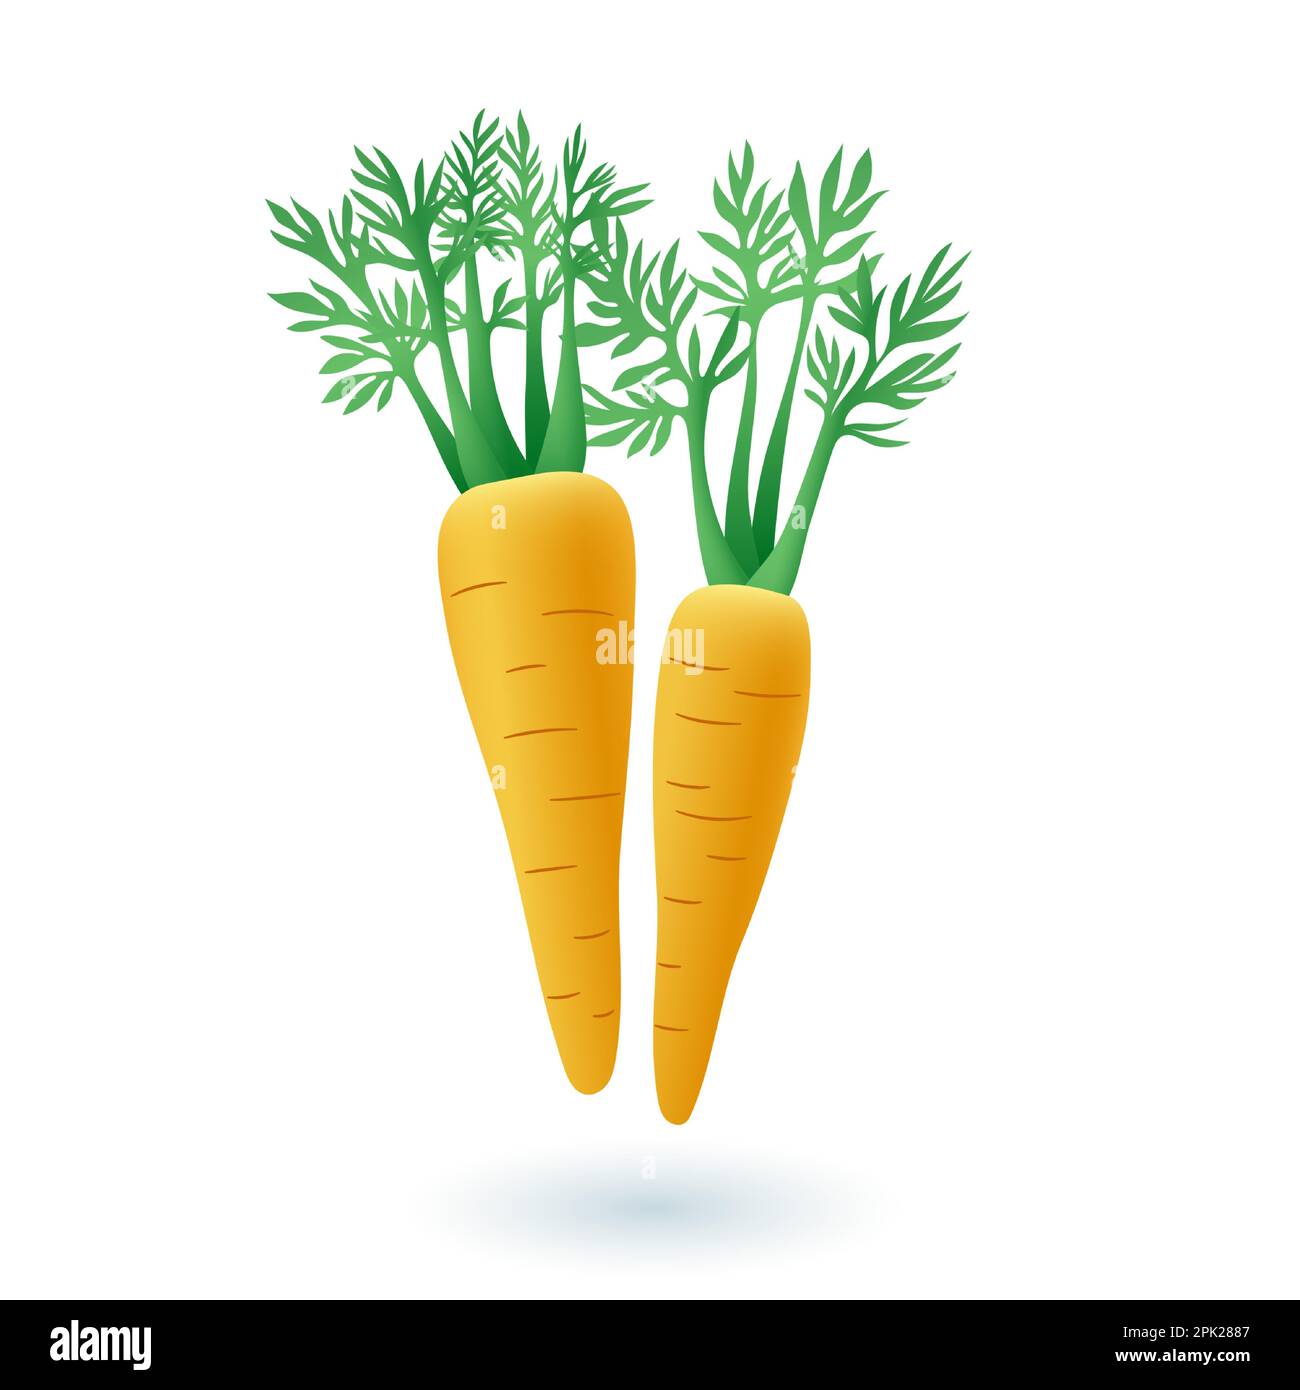 3d cartoon style carrots icon on white background Stock Vector Image ...